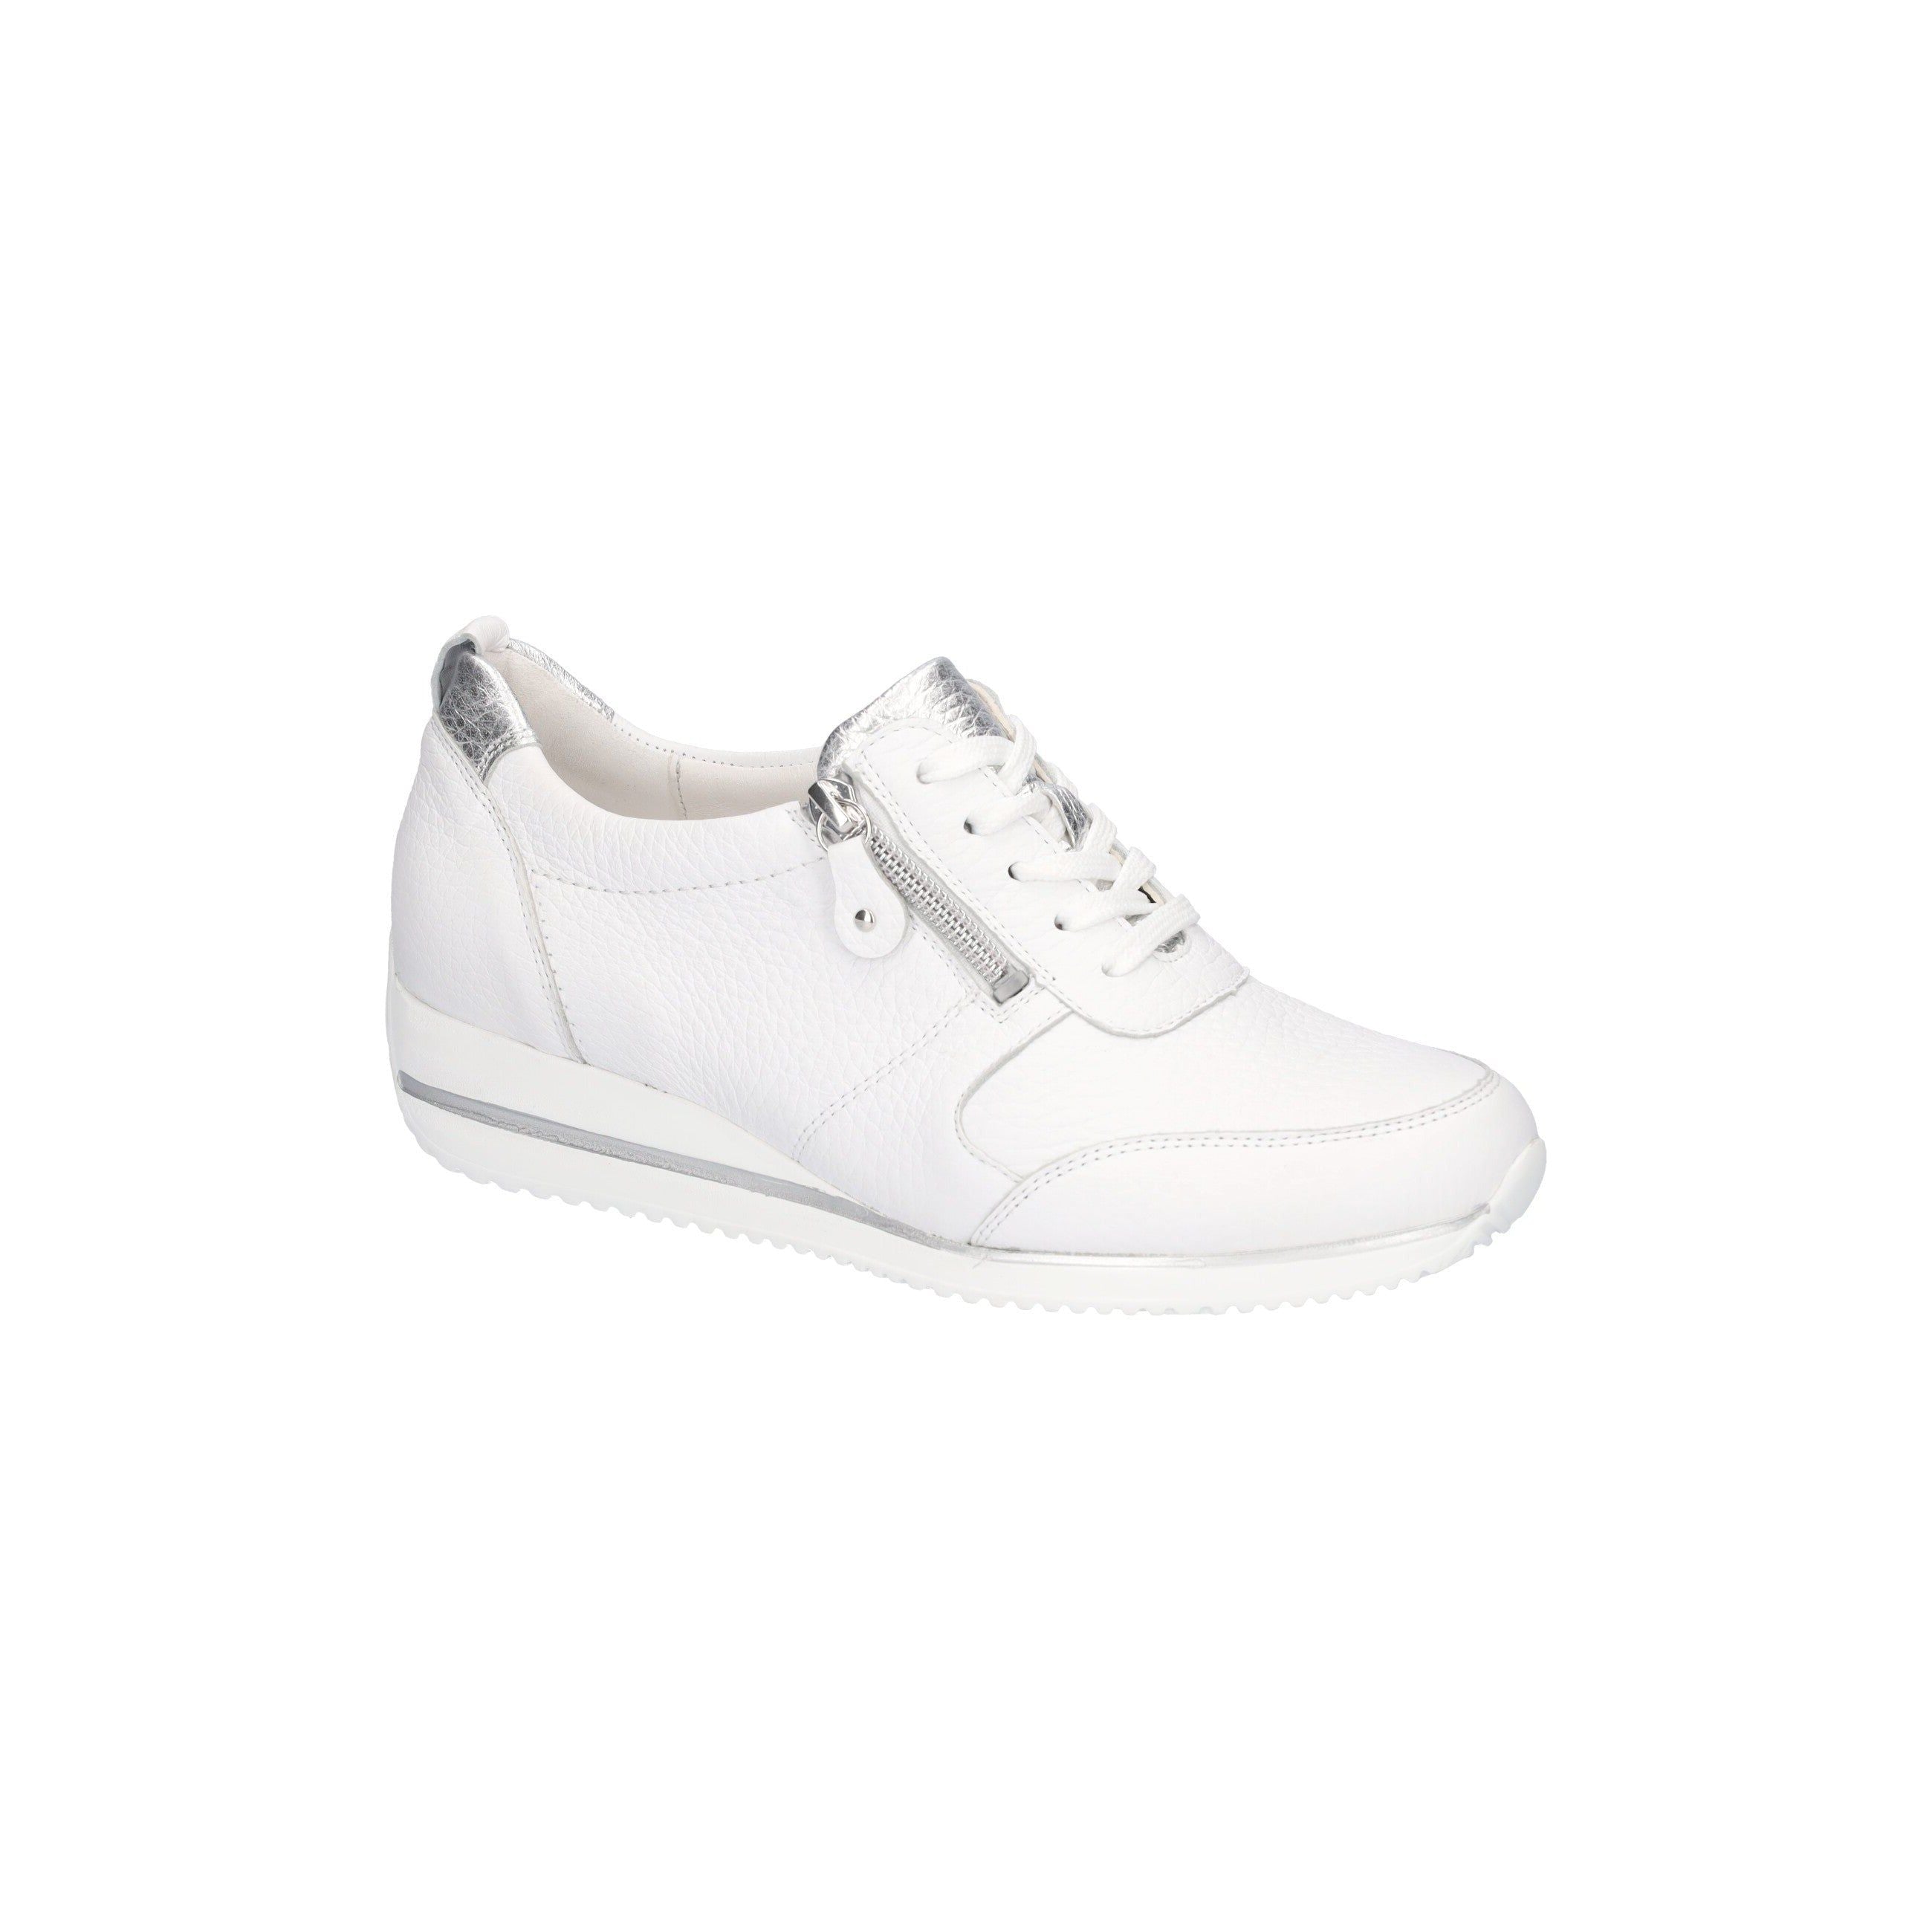 Waldlaufer Himona (980007)- Ladies Lace Trainer with Side Zip in White .Waldlaufer Shoes | Wide Fit| Wisemans | Bantry | Shoe Shop |  West Cork | Munster| Ireland